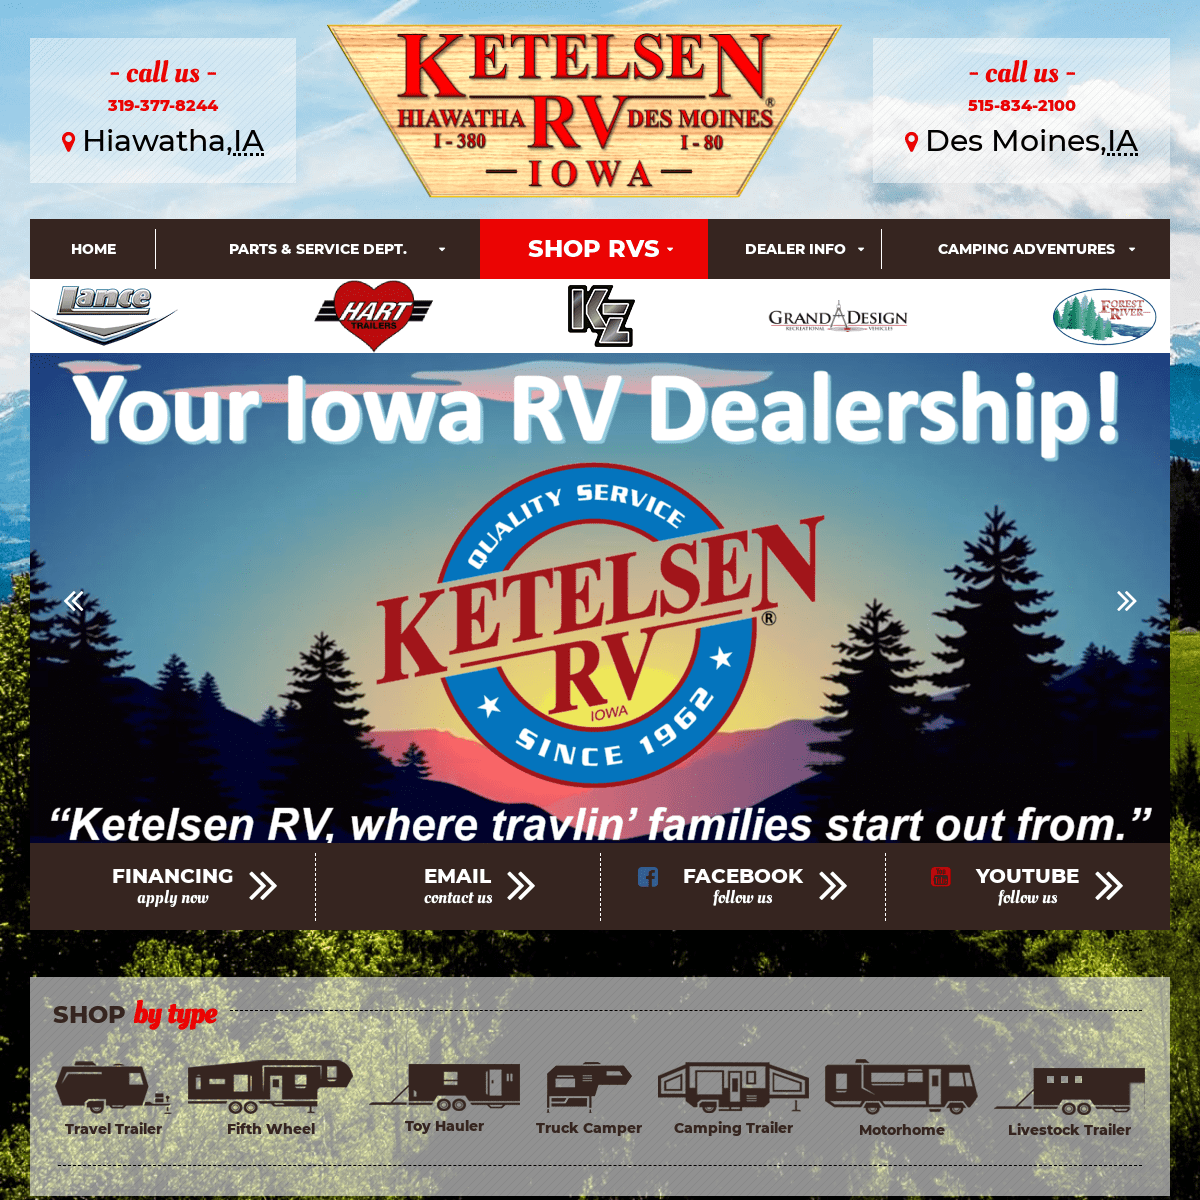 Ketelsen RV - Hiawatha & De Soto, IA - Travel Trailers, Fifth Wheels, Toy Haulers, Motorhomes, Parts, Accessories and More